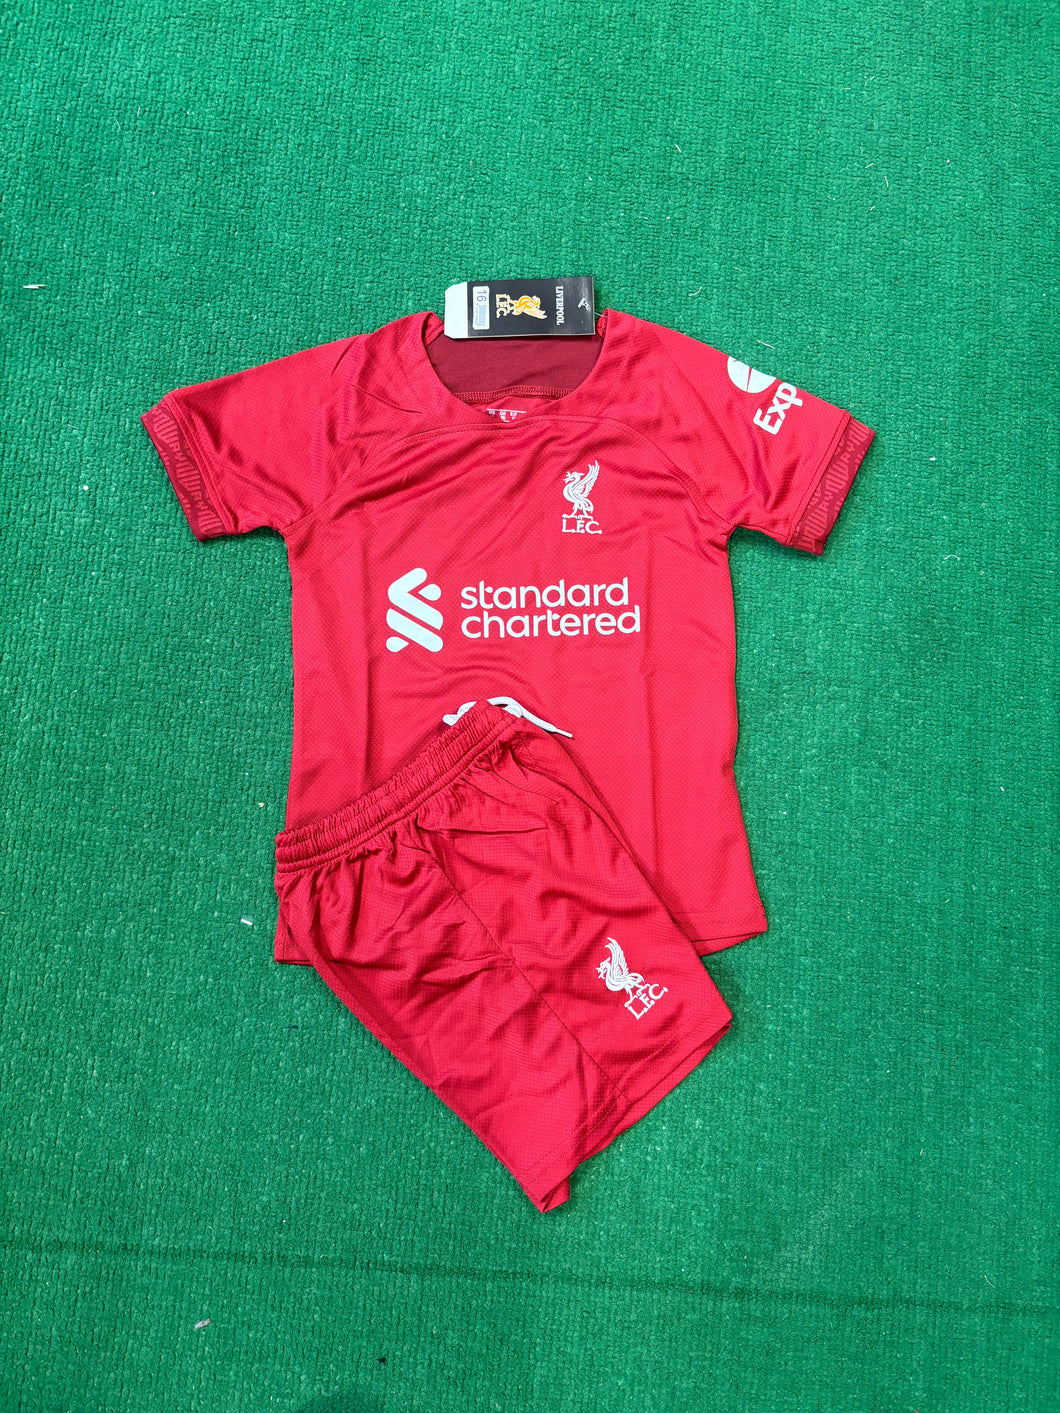 Liverpool 22/23 Youth Home Kit